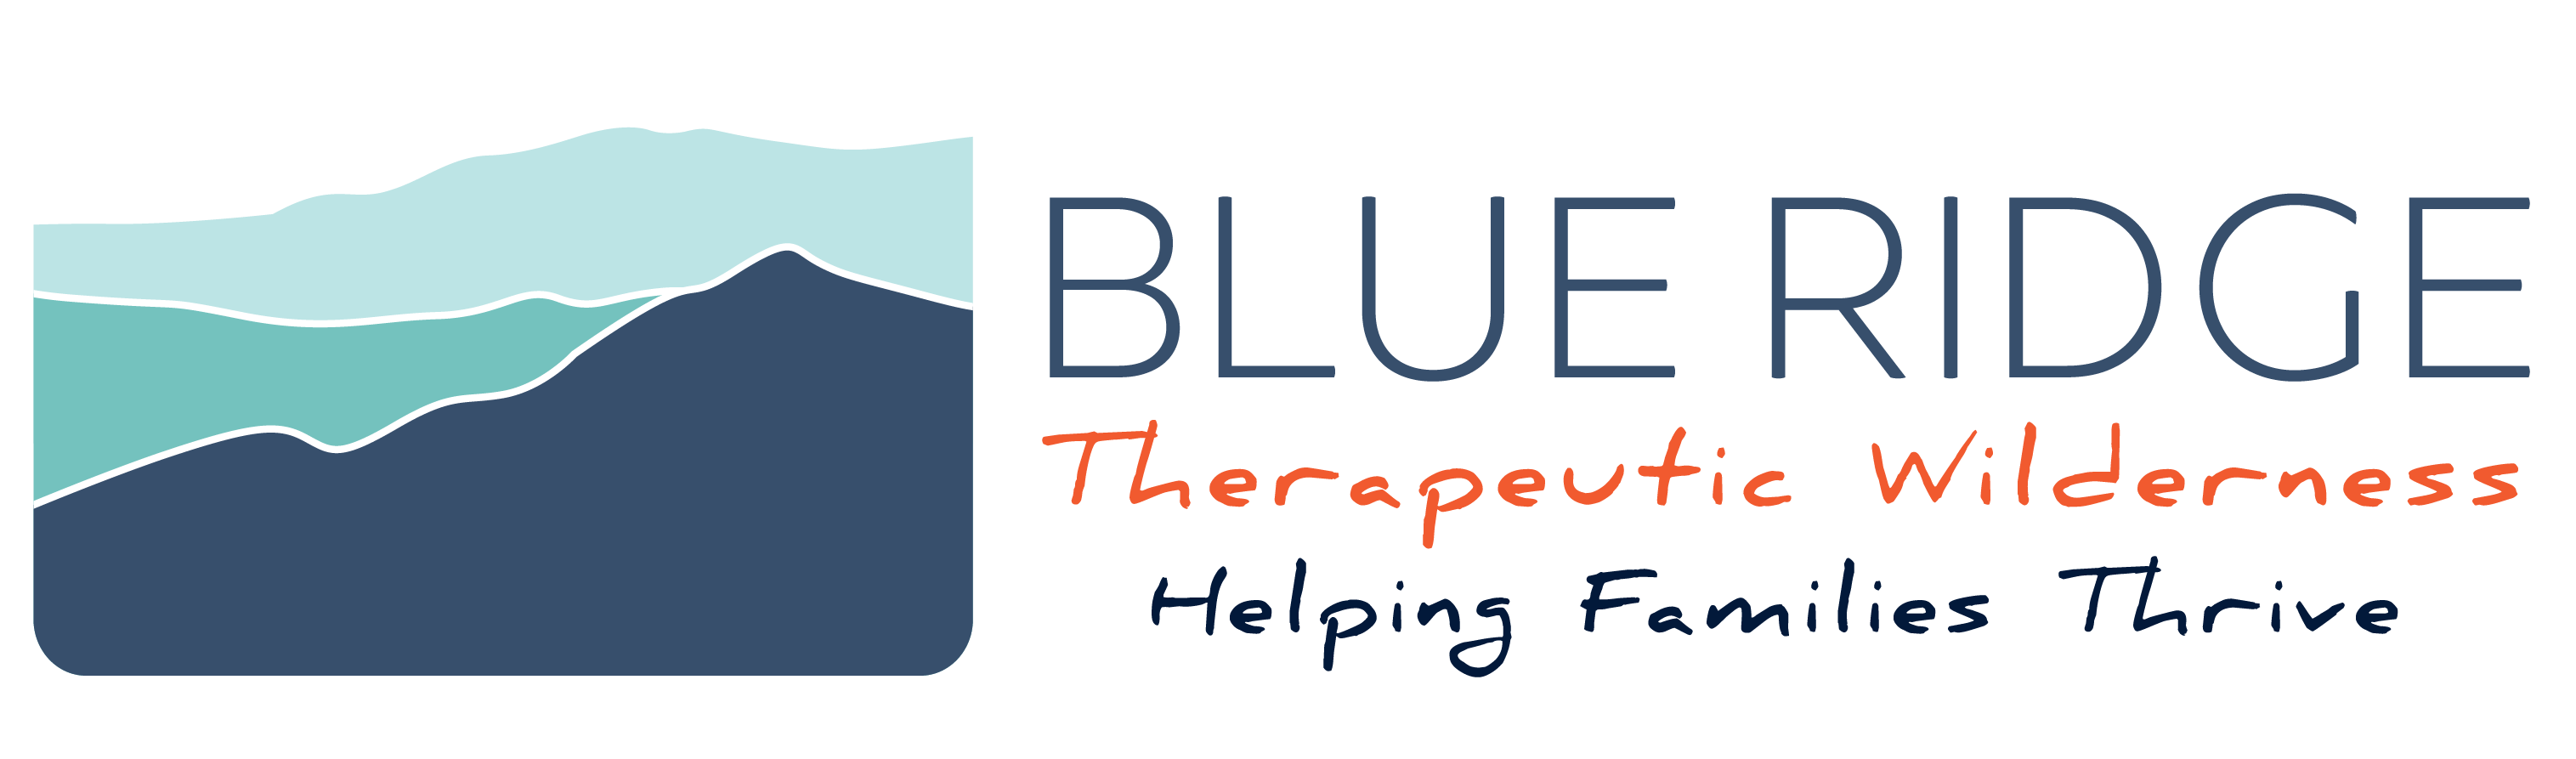 Logo for Blue Ridge Therapeutic Wilderness, helping families thrive tagline